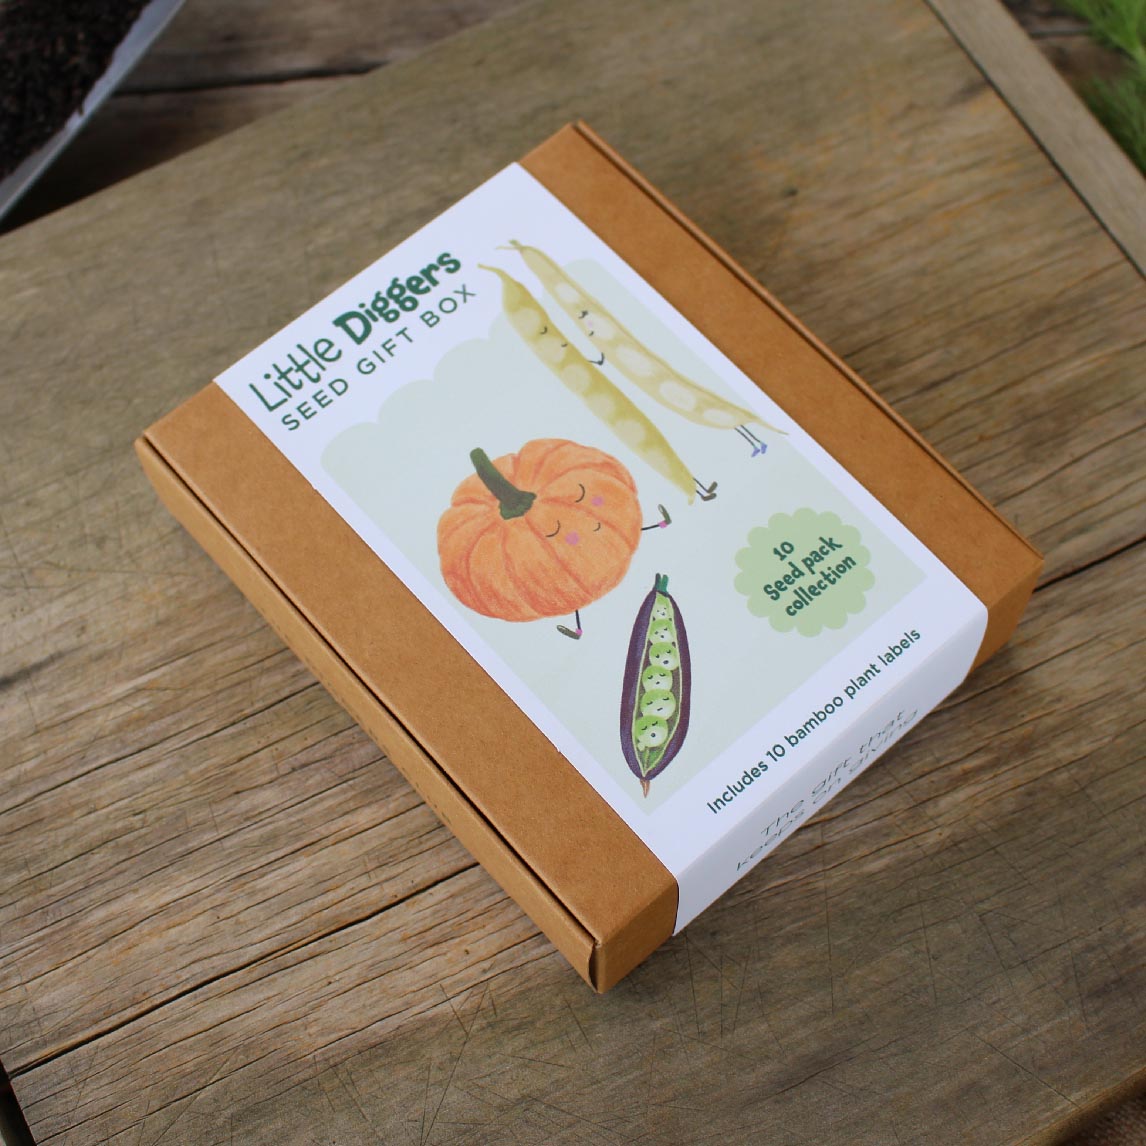 Little Diggers Seed Starter Gift Box